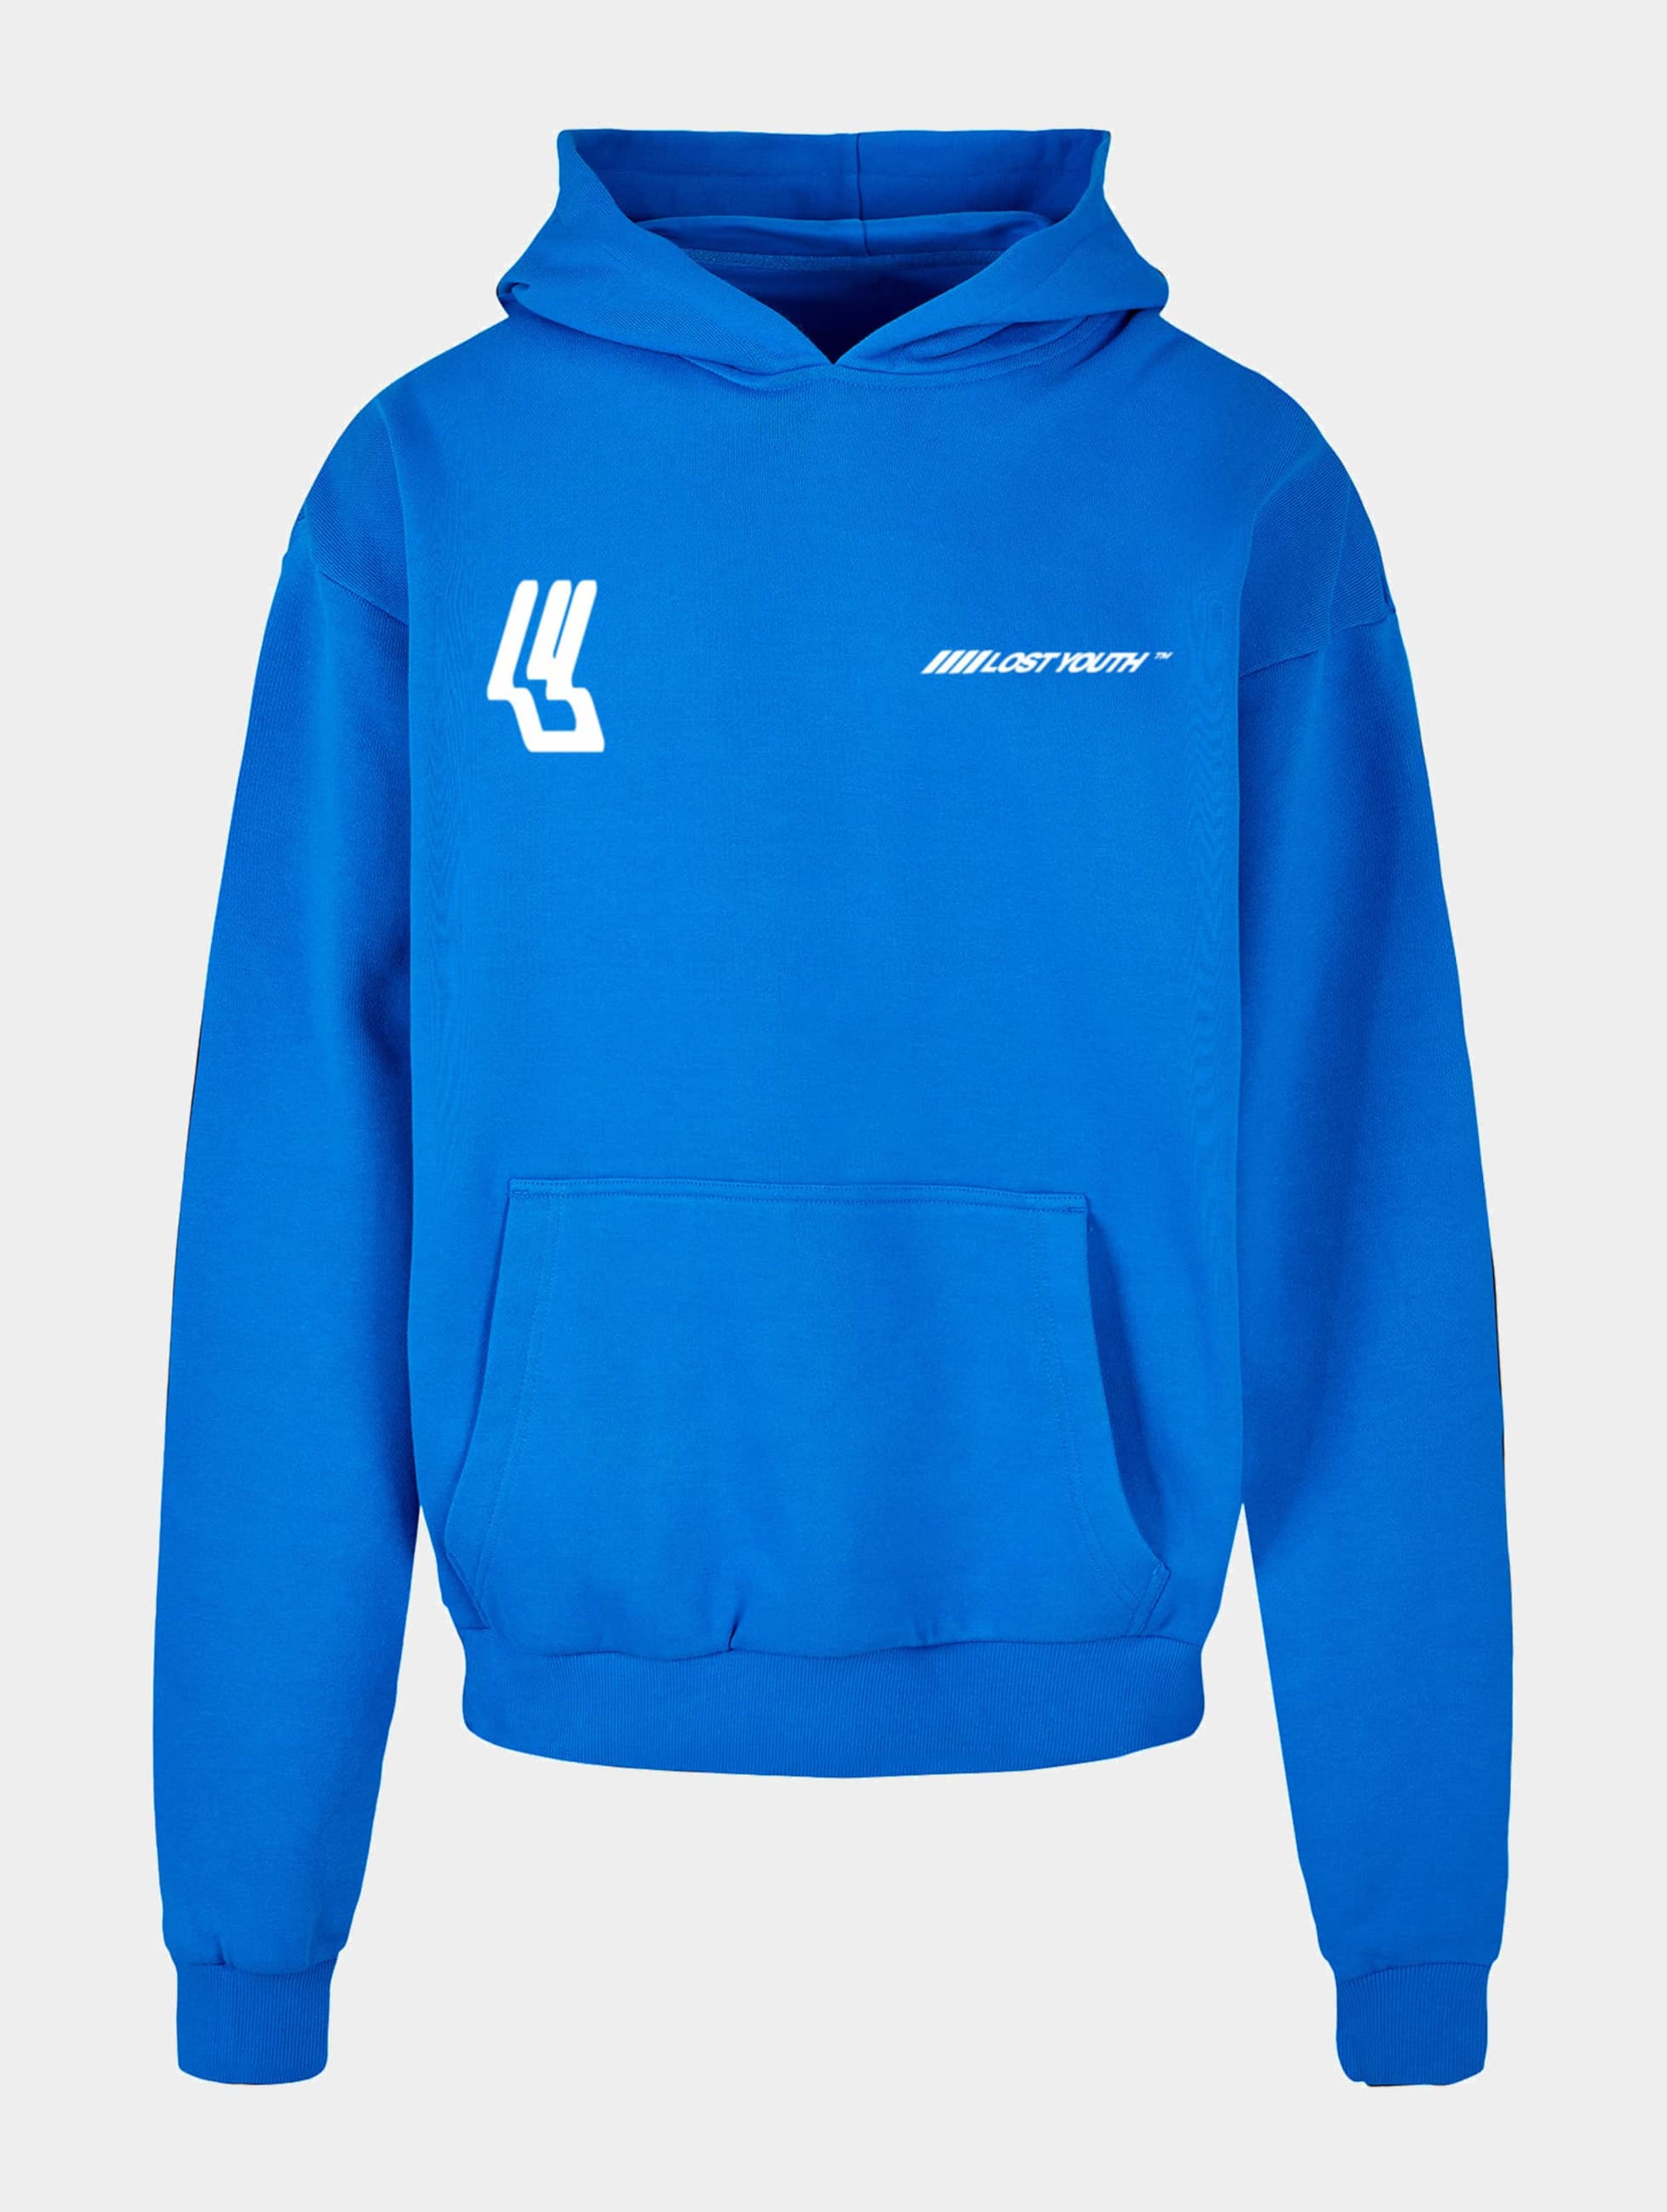 Lost Youth LY HOODY - ICON V.2 Mannen op kleur blauw, Maat 5XL